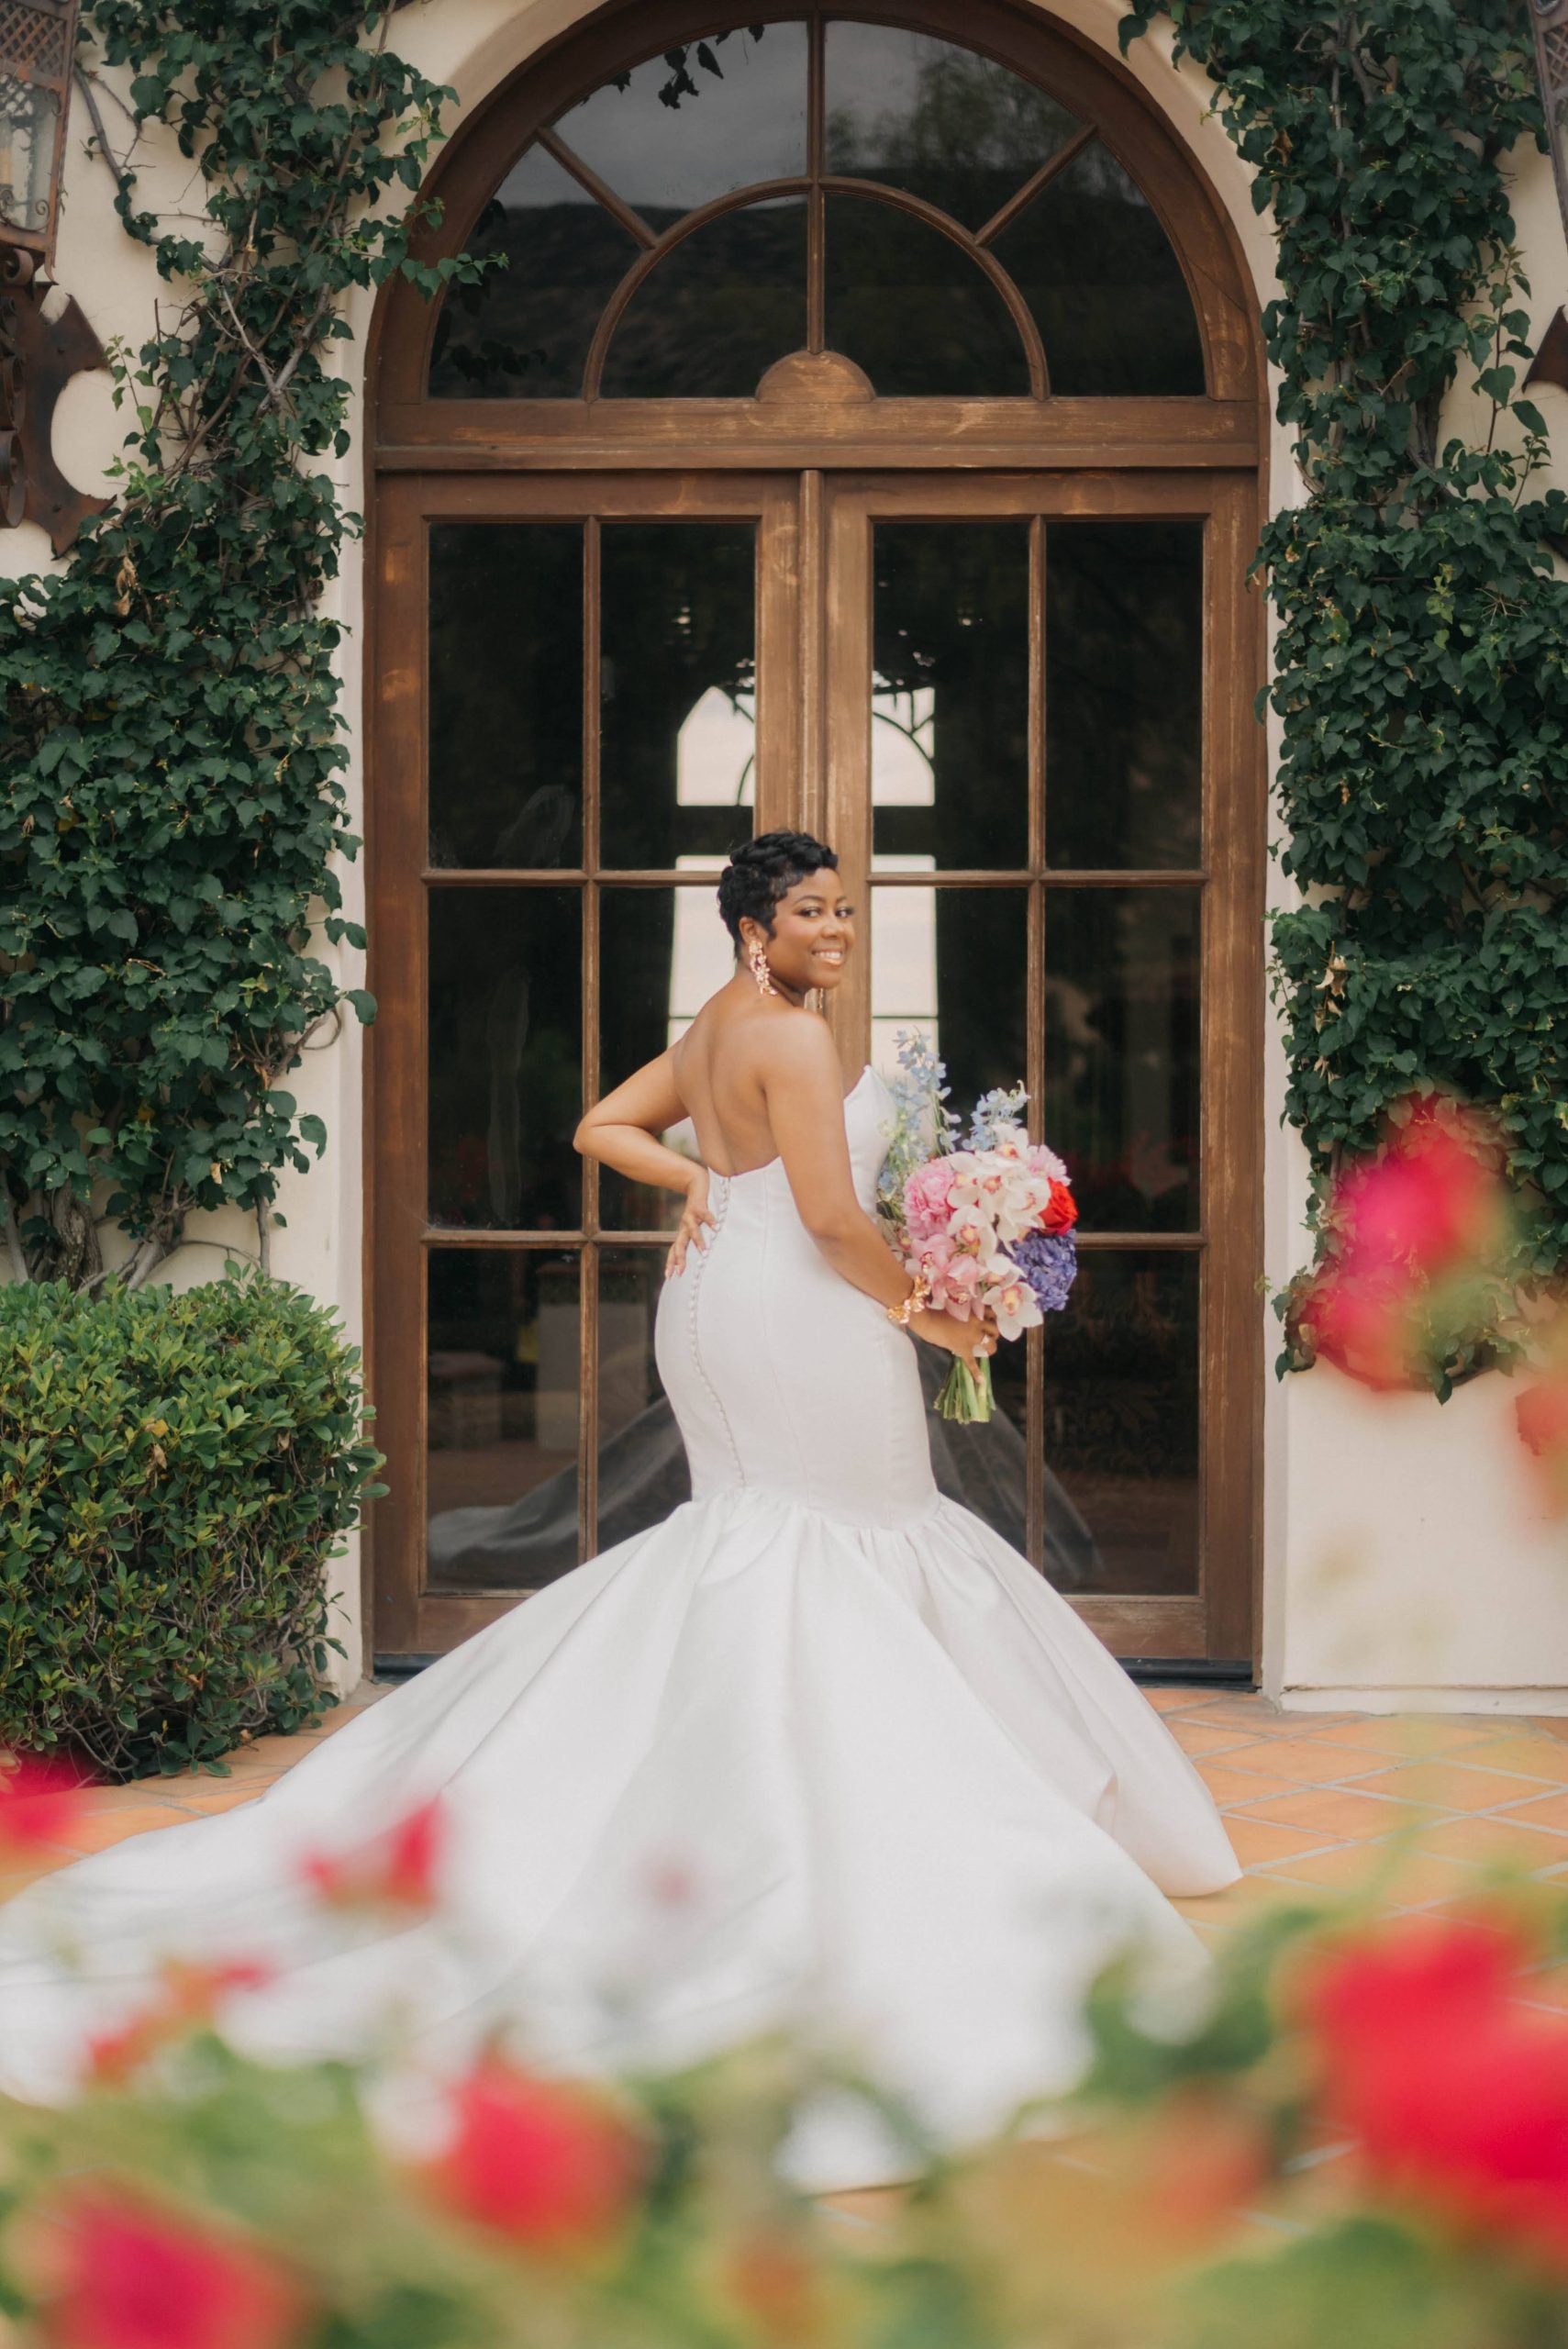 Bridal Bliss: Inside Brittany And Daniel’s Unplugged SoCal Celebration